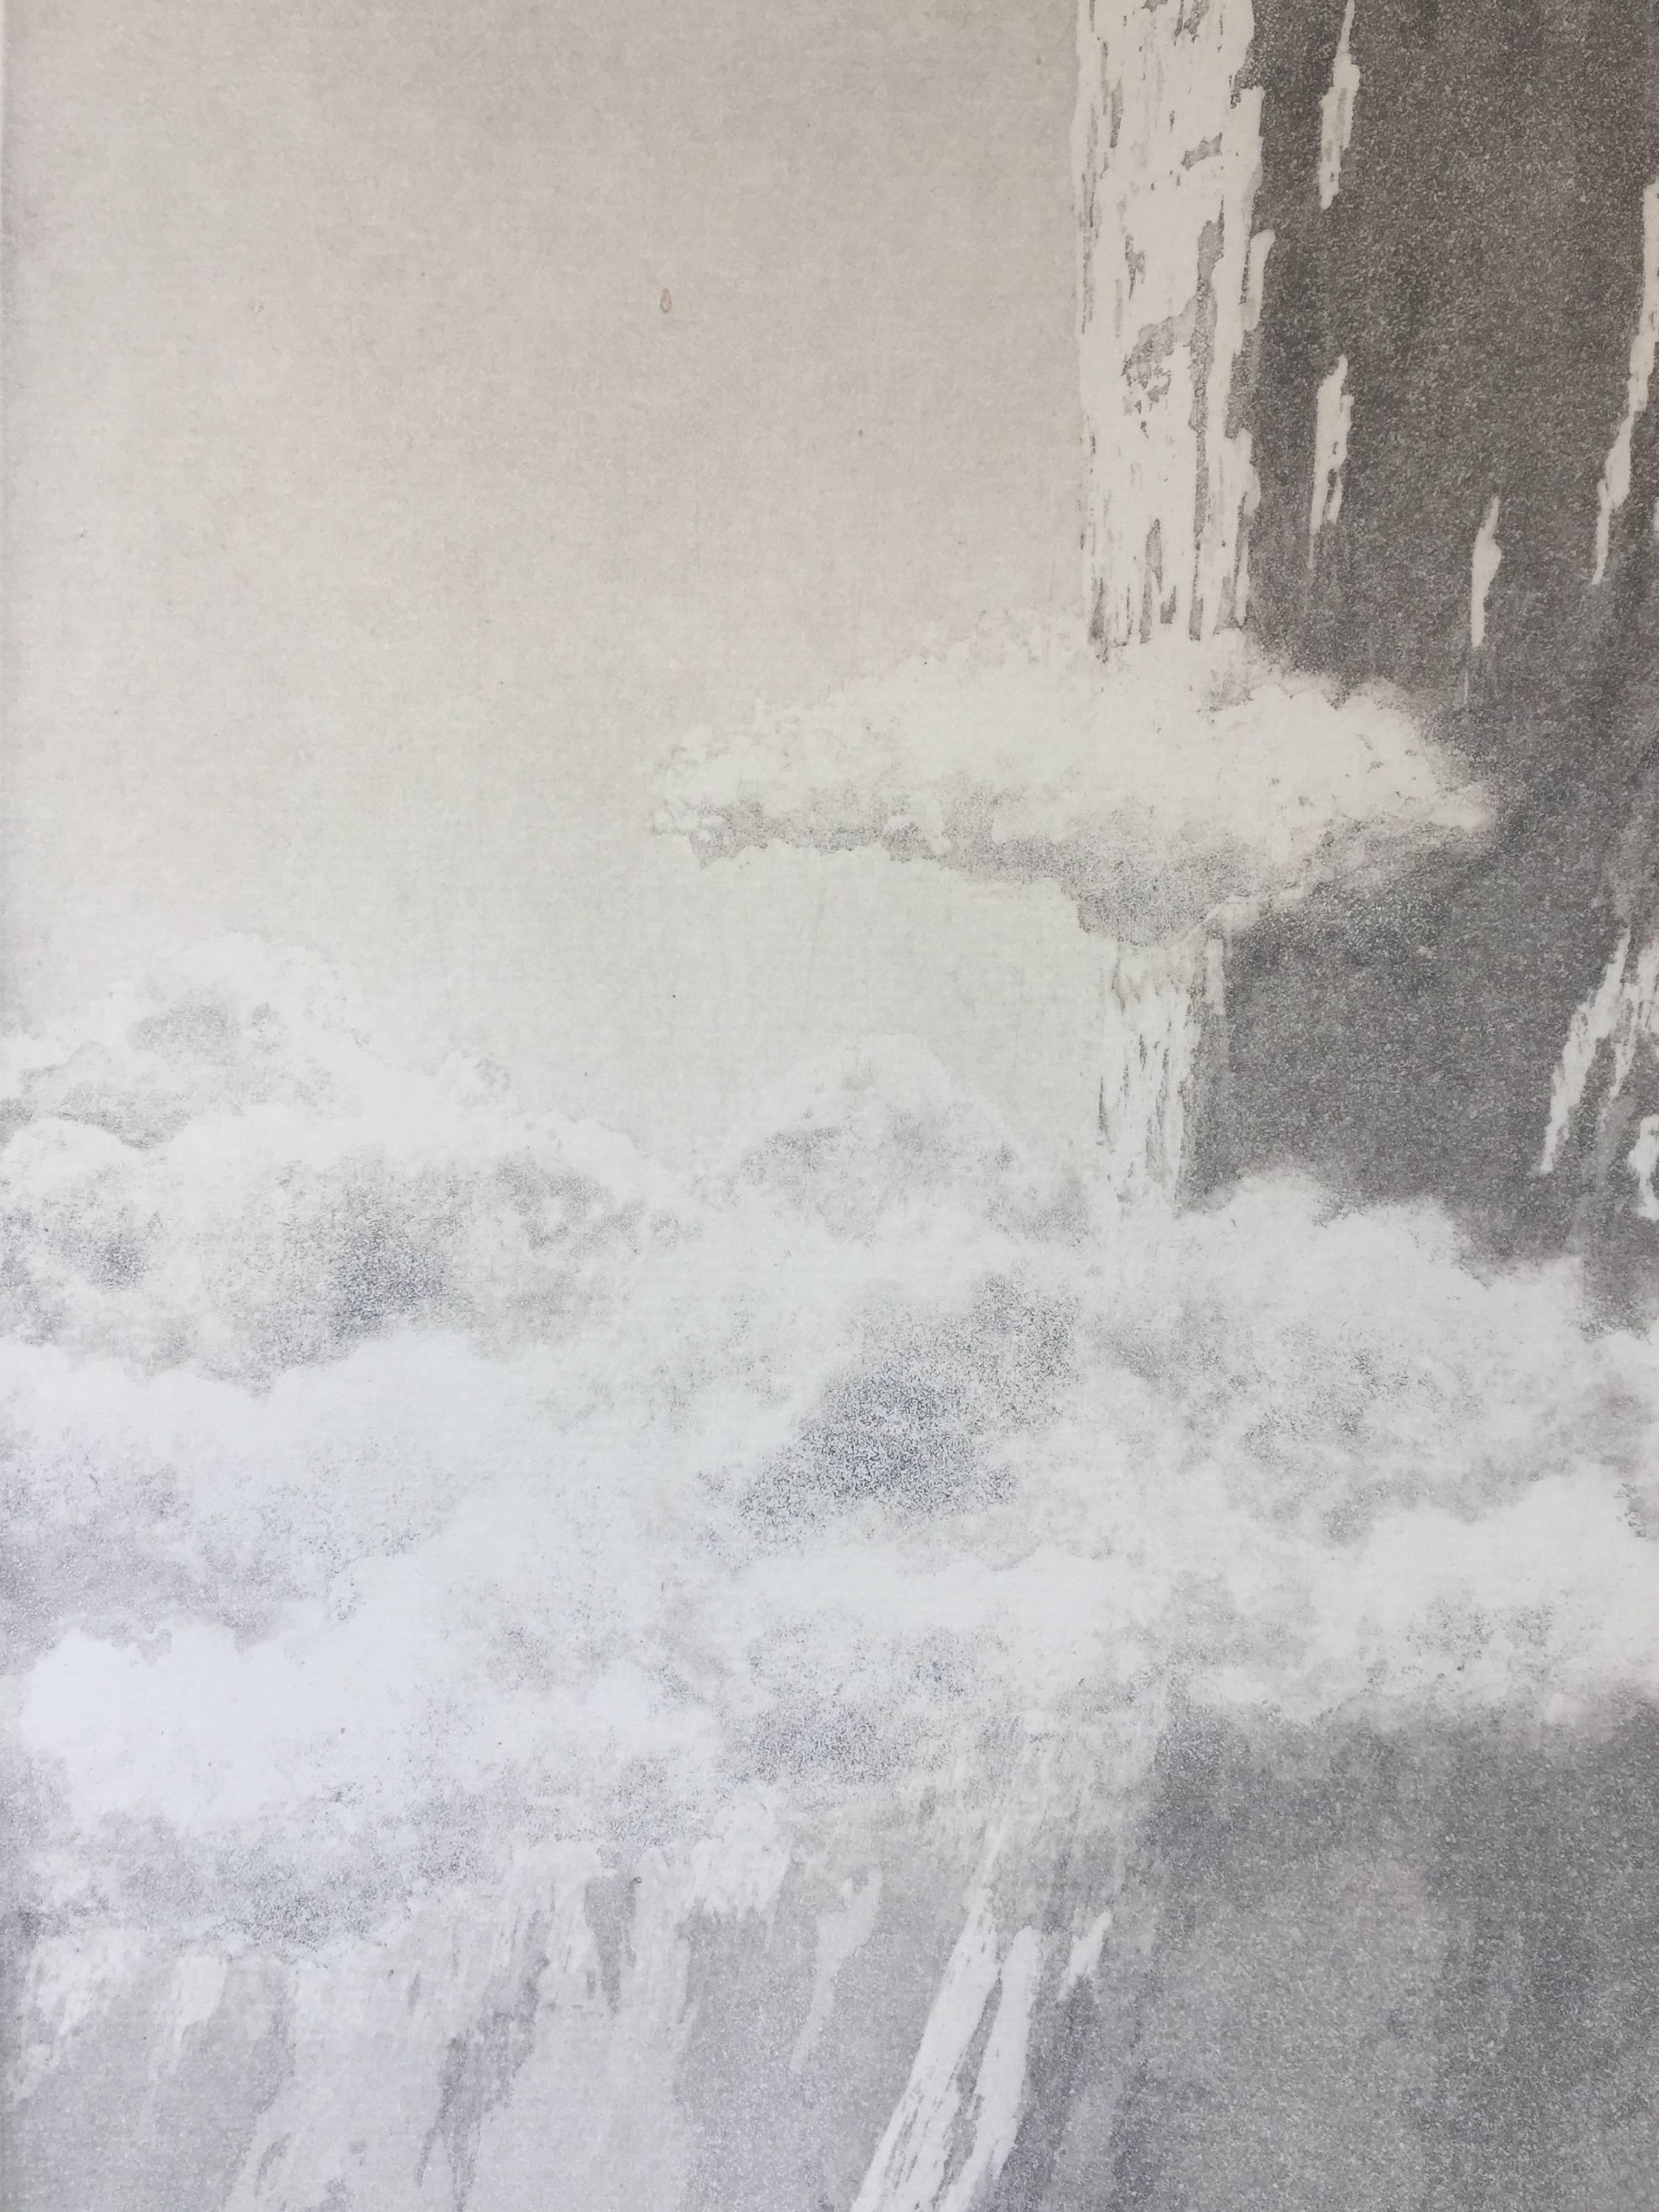 HAROLD L. DOOLITTLE  (1883 – 1974)

          TOWERING MAJESTY - YOSEMITE c. 1940-45
          Aquatint, signed and titled in pencil. Dedicated to Mabel & Ed, July 5, 1947. 
          13 7/8 x 9 3/4”. Full margins in good condition, save for slight